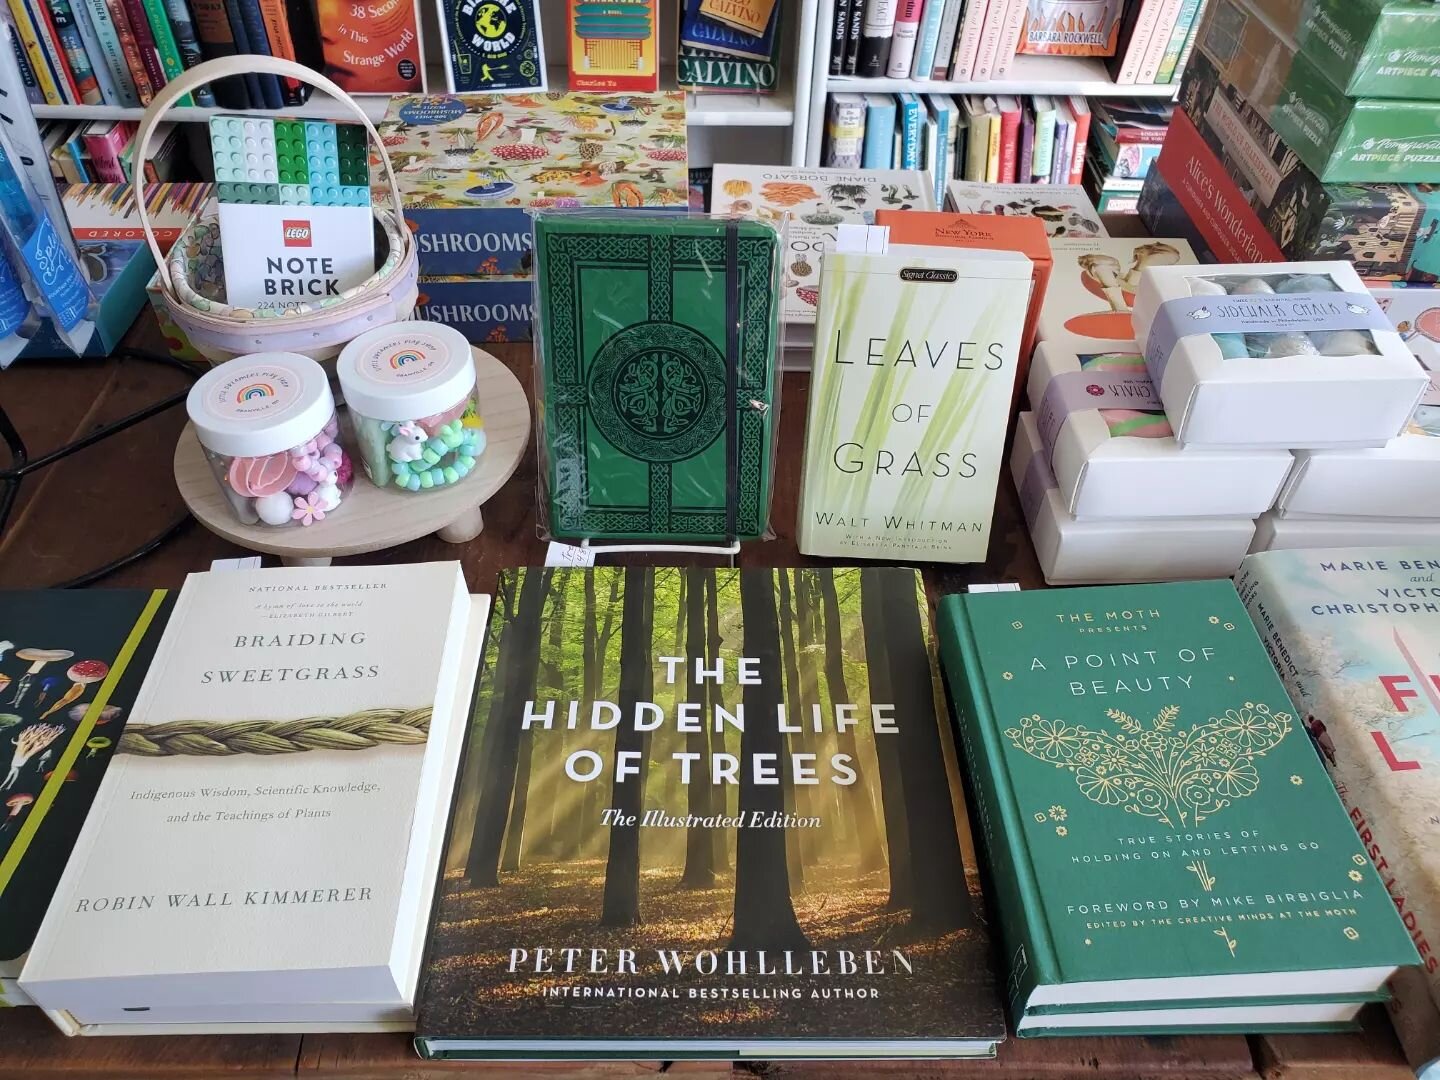 Grab something green this week for Saint Patrick's Day 💚🍀🌲📗 

1st Photo: Braiding Sweetgrass: Indigenous Wisdom, Scientific Knowledge and the Teaching of Plants by Robin Wall Kimmerer, The Hidden Life of Trees by Peter Wohllenben, The Point of Be